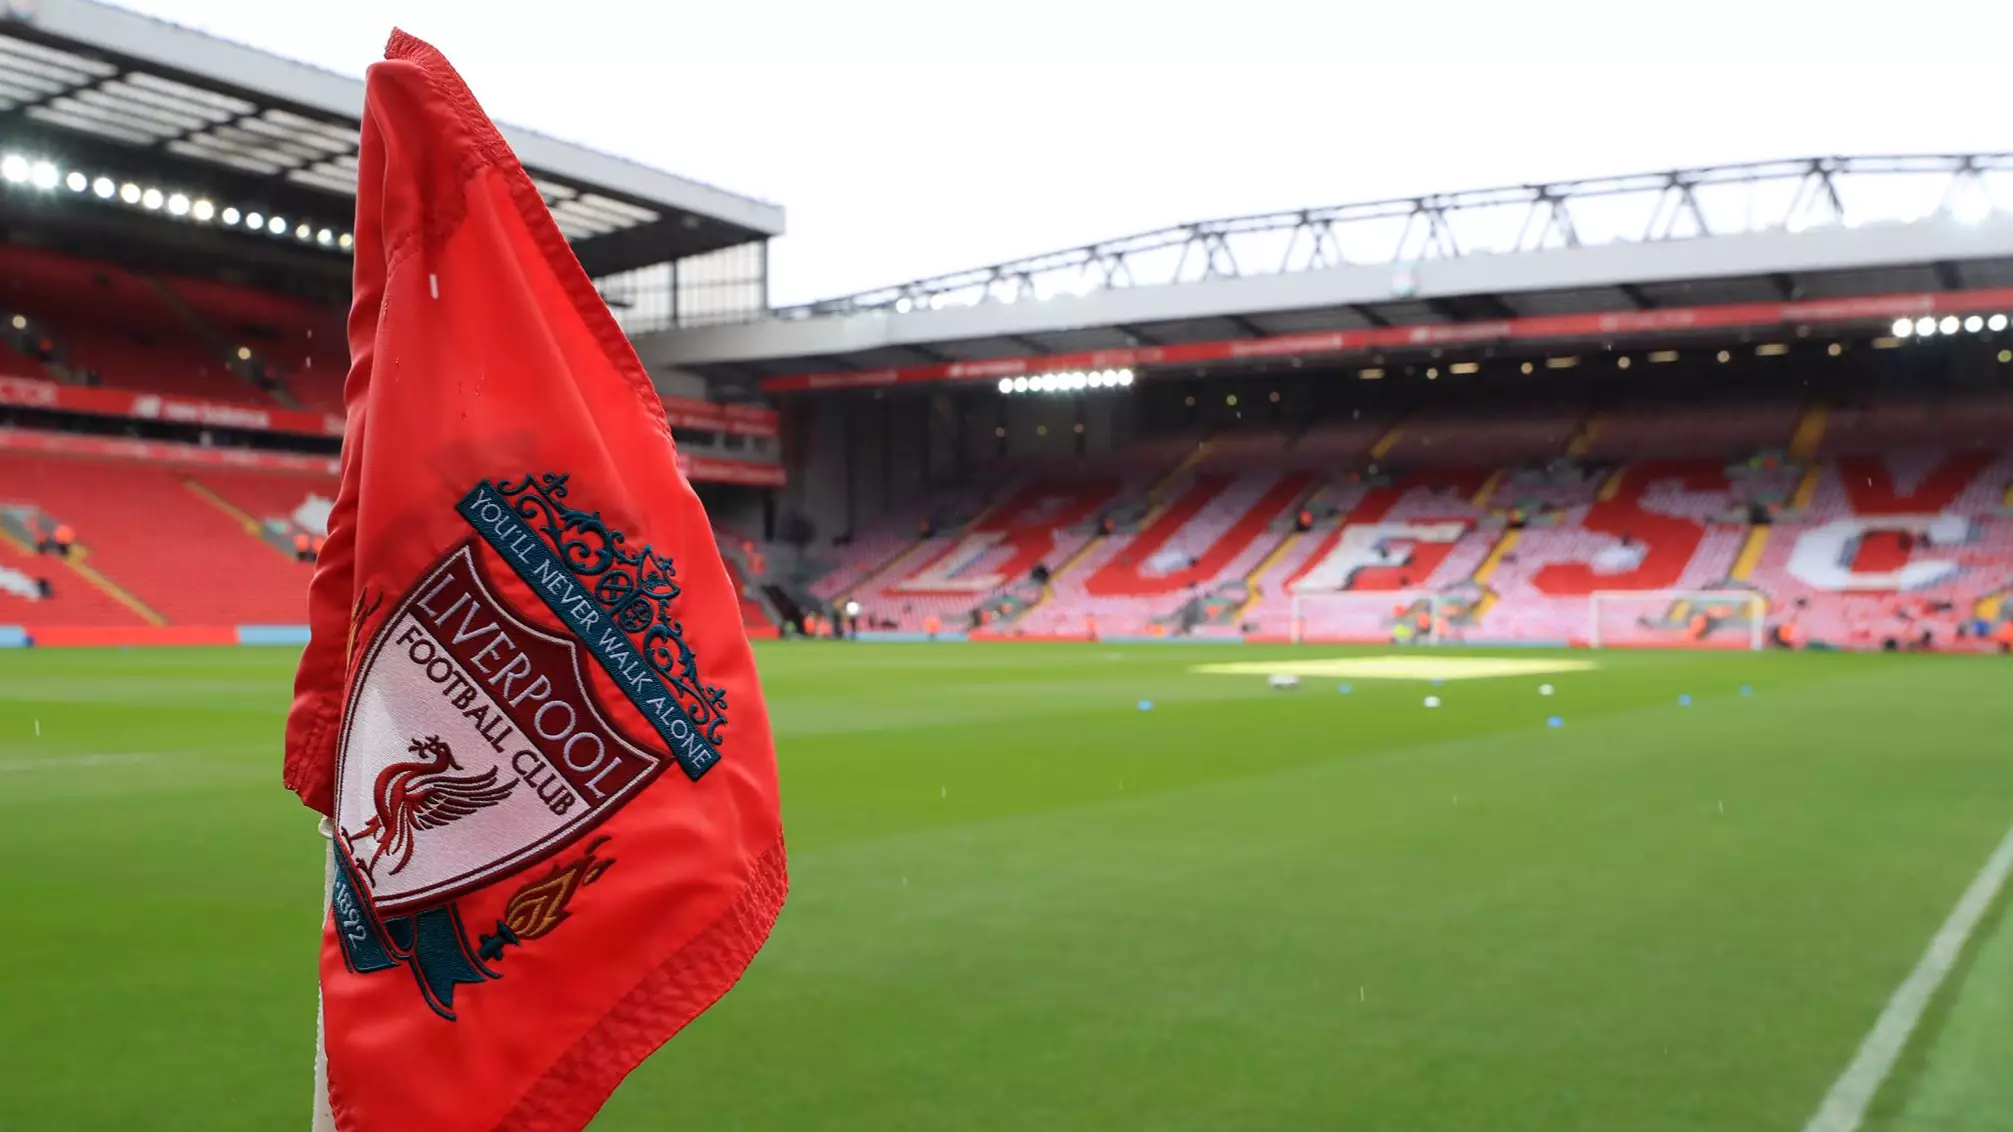 Liverpool Preparing £40 Million Move For Player They Sold For £1 Million